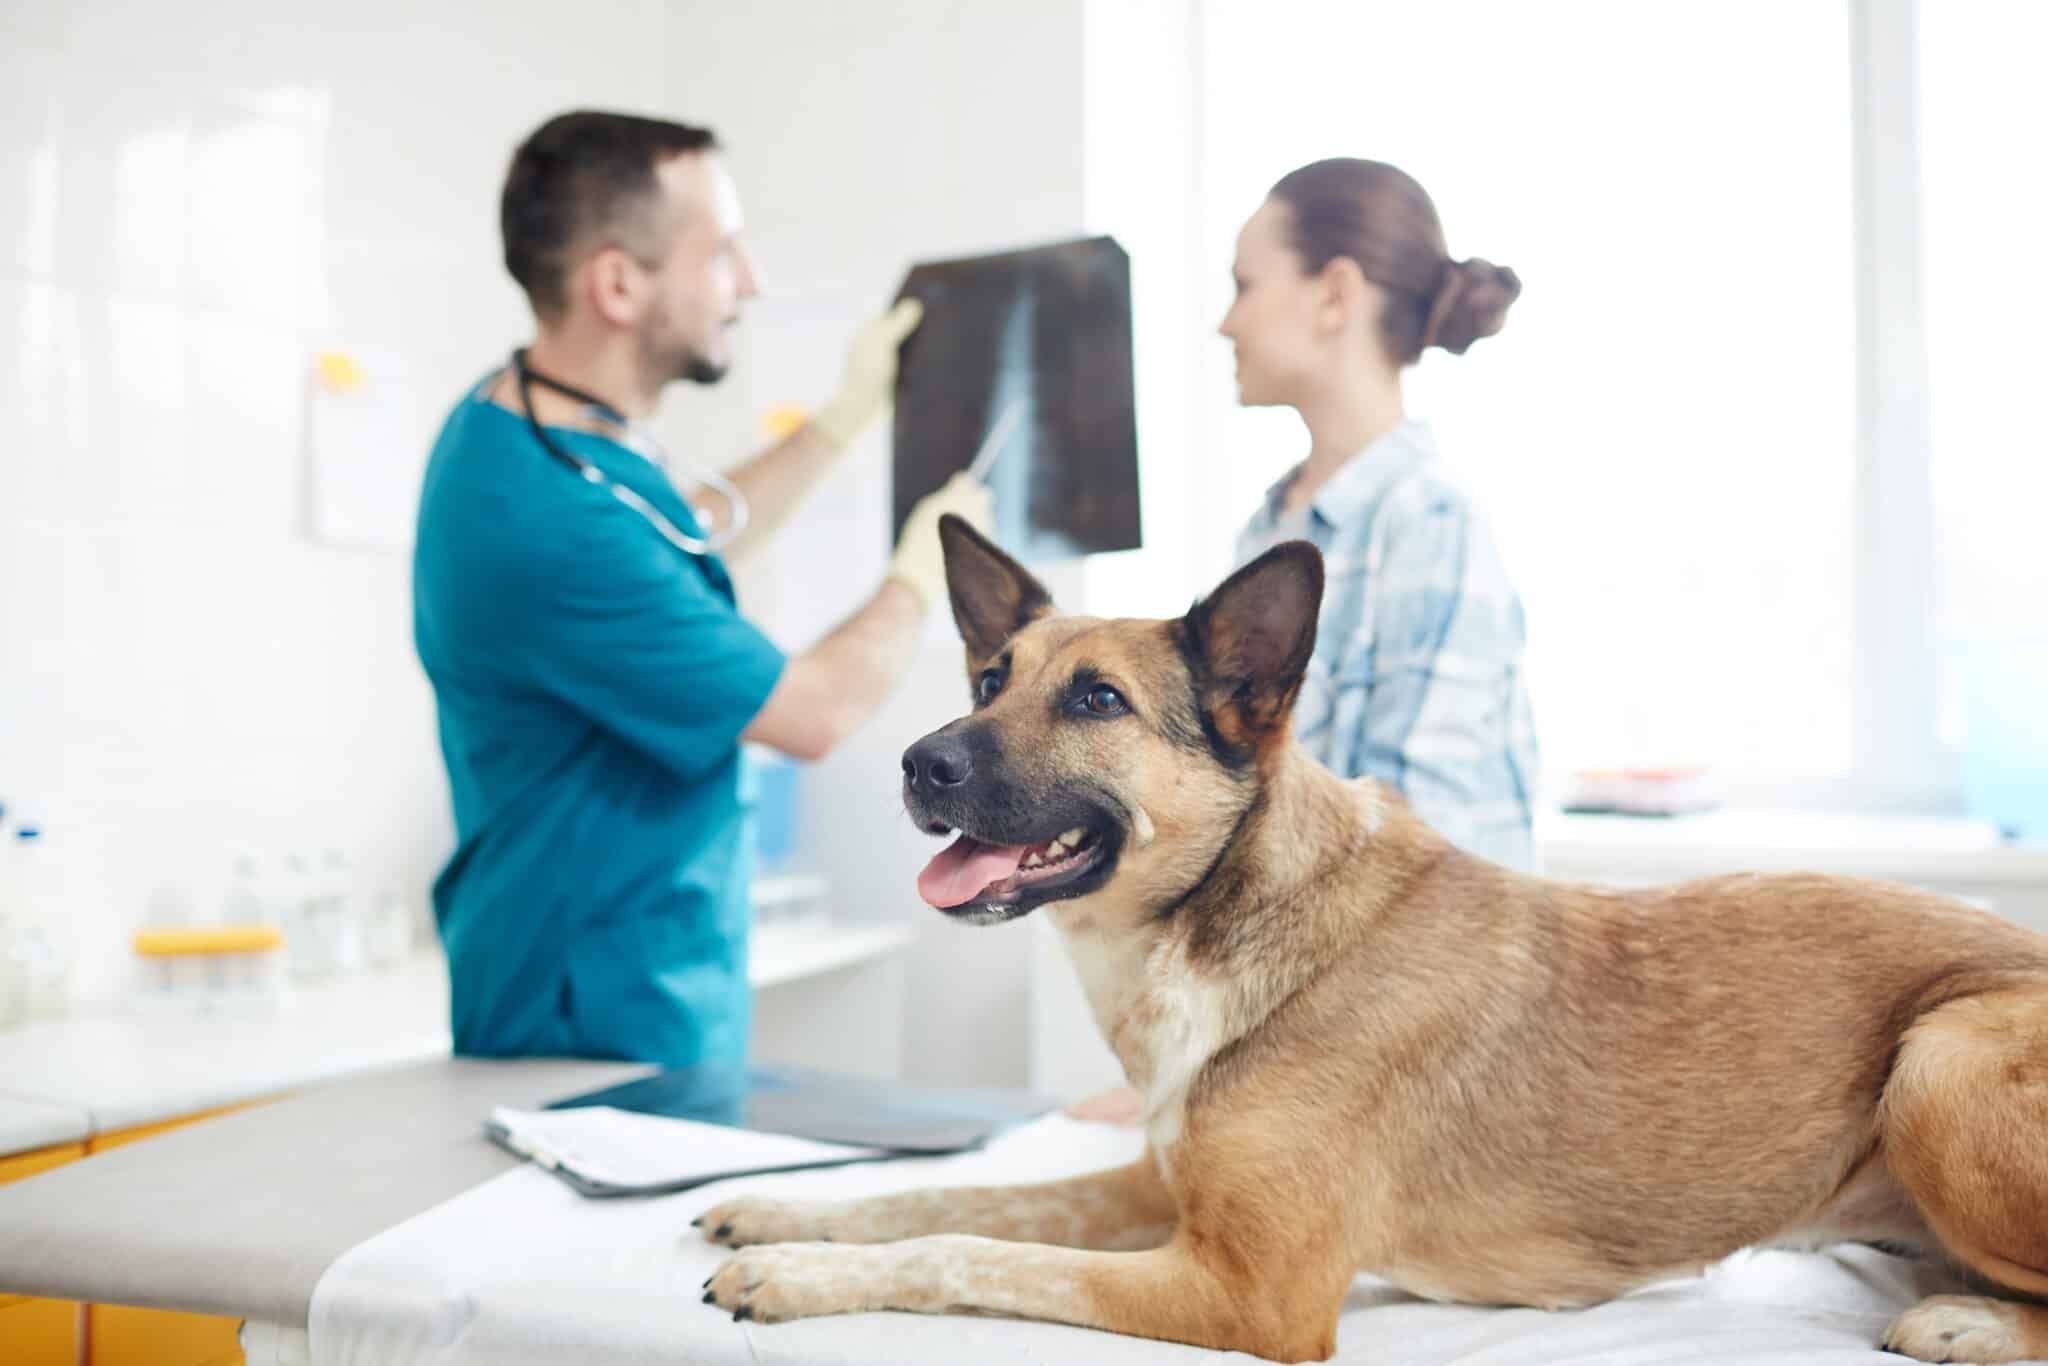 German shepherd lying on medical table while vet commenting its x-ray image to owner